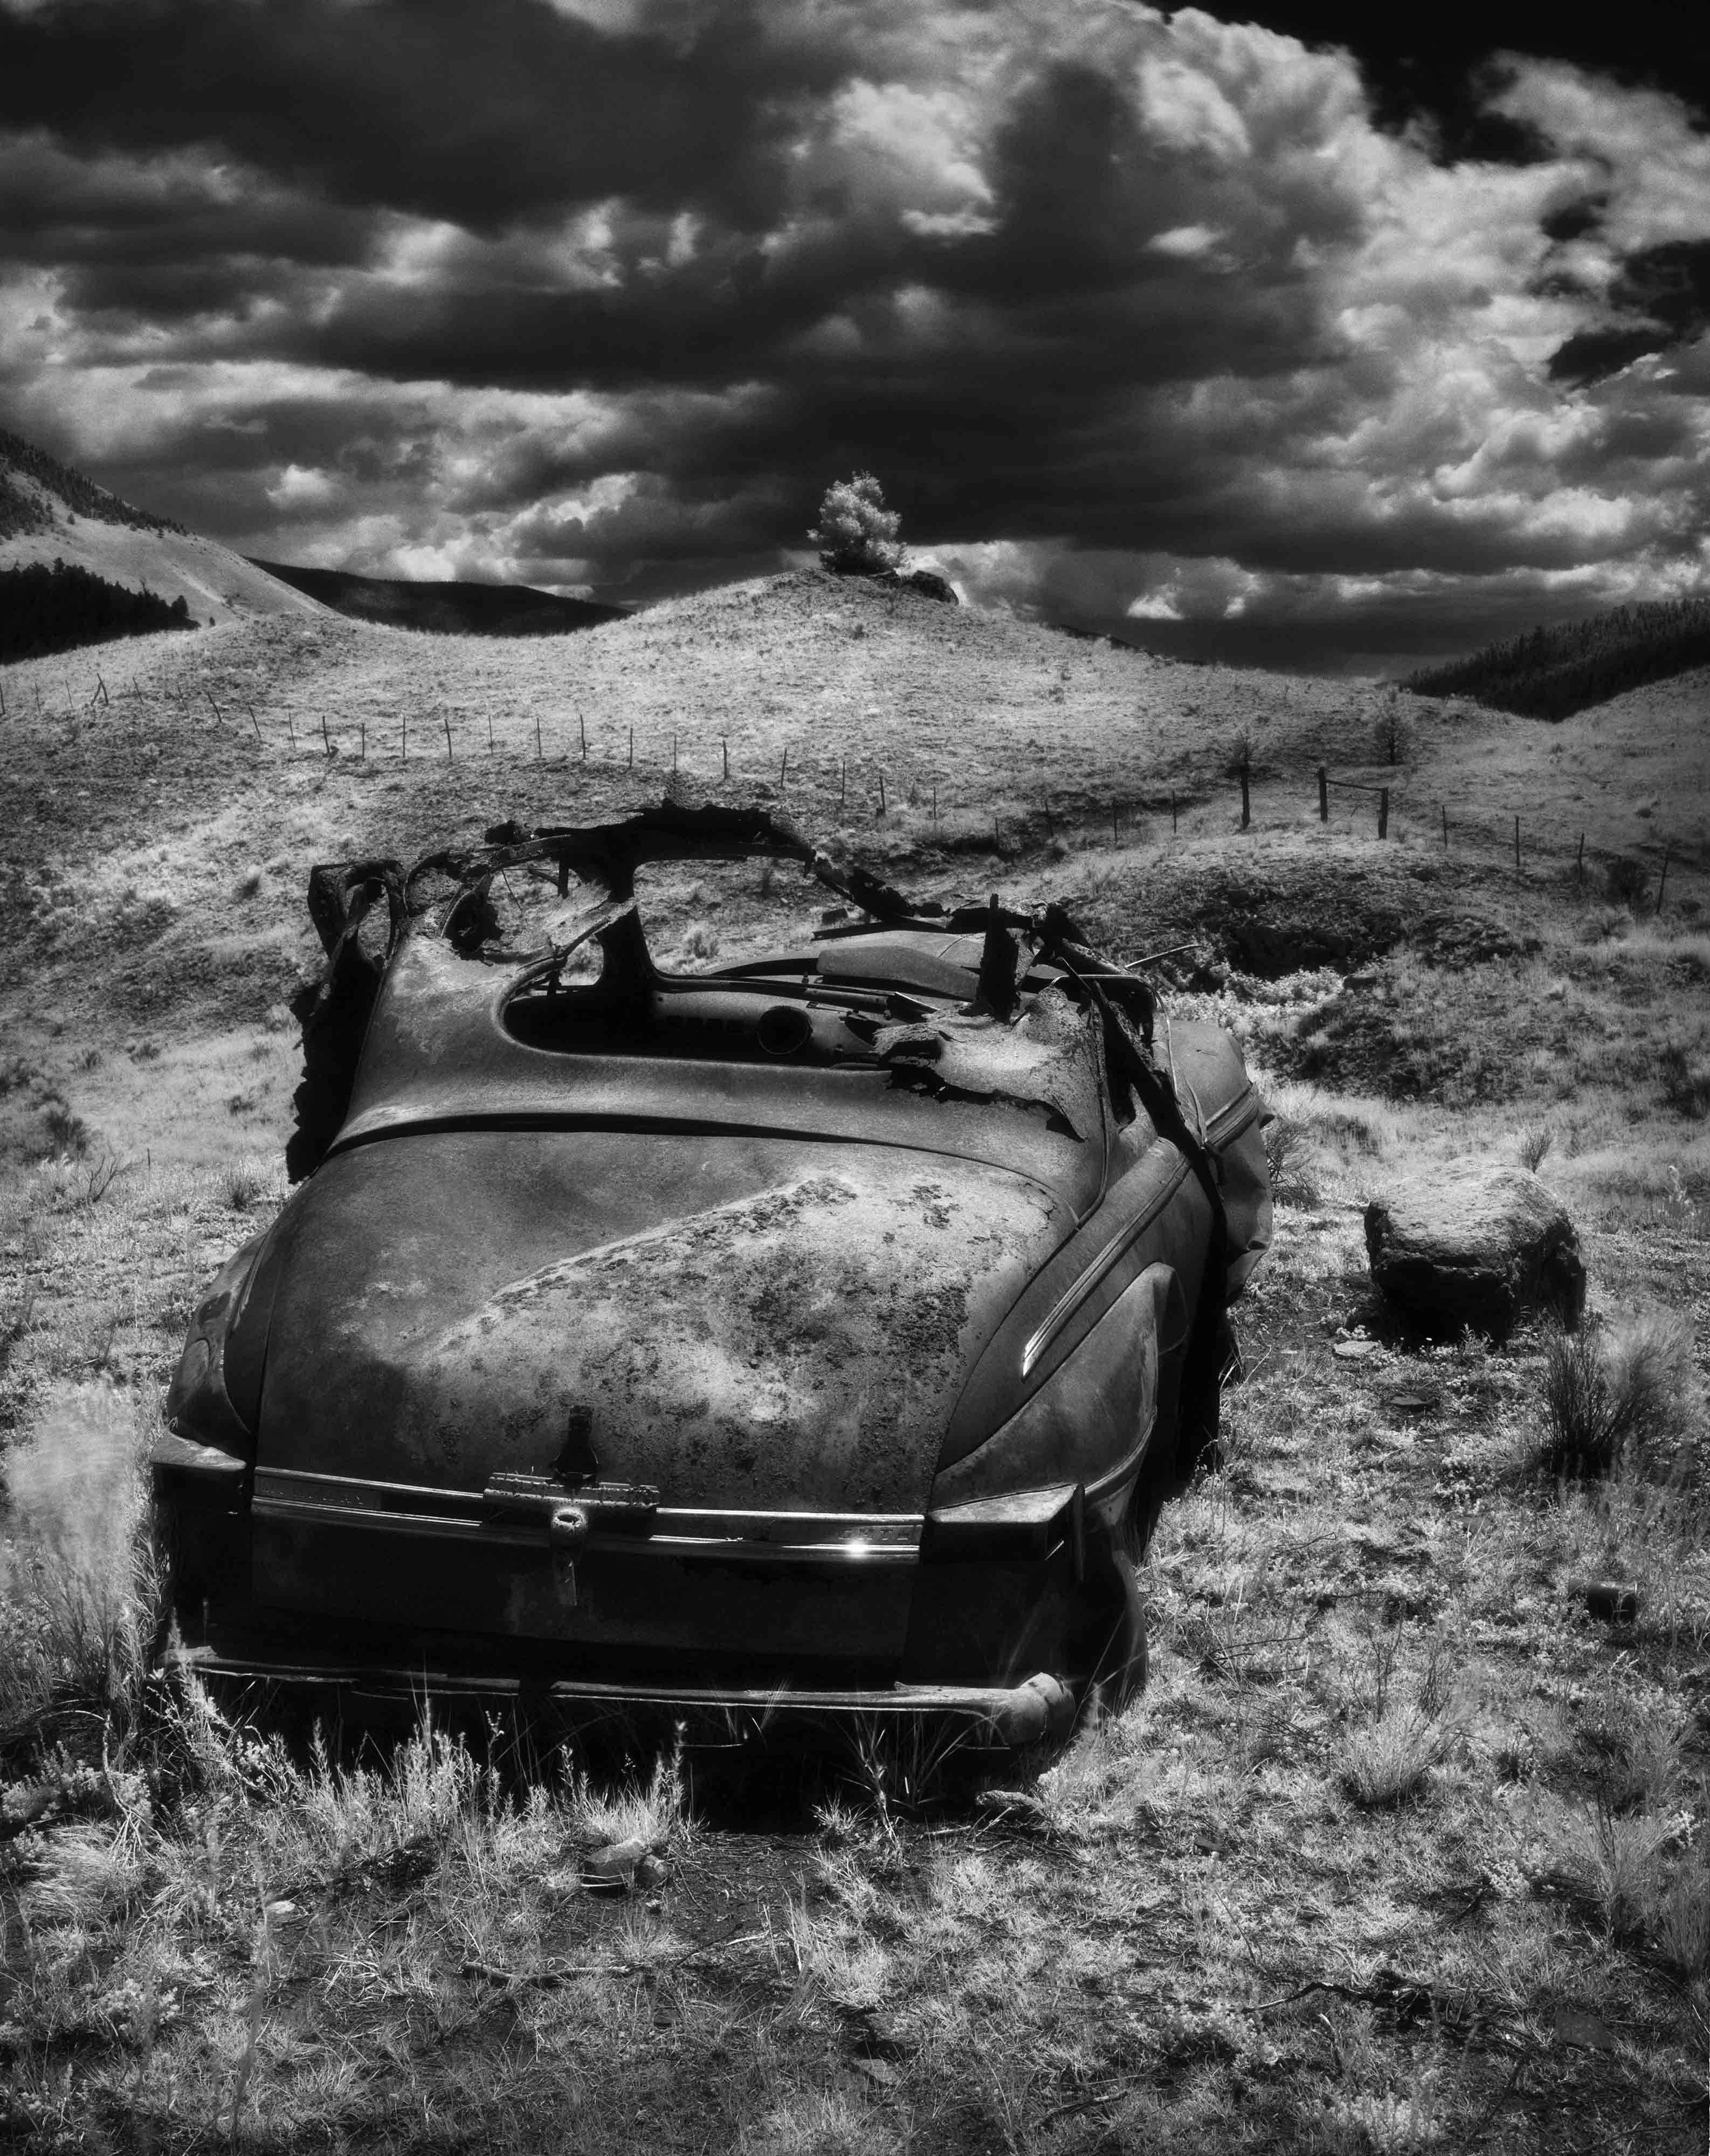 Landscape Photography: 'End of the Road'